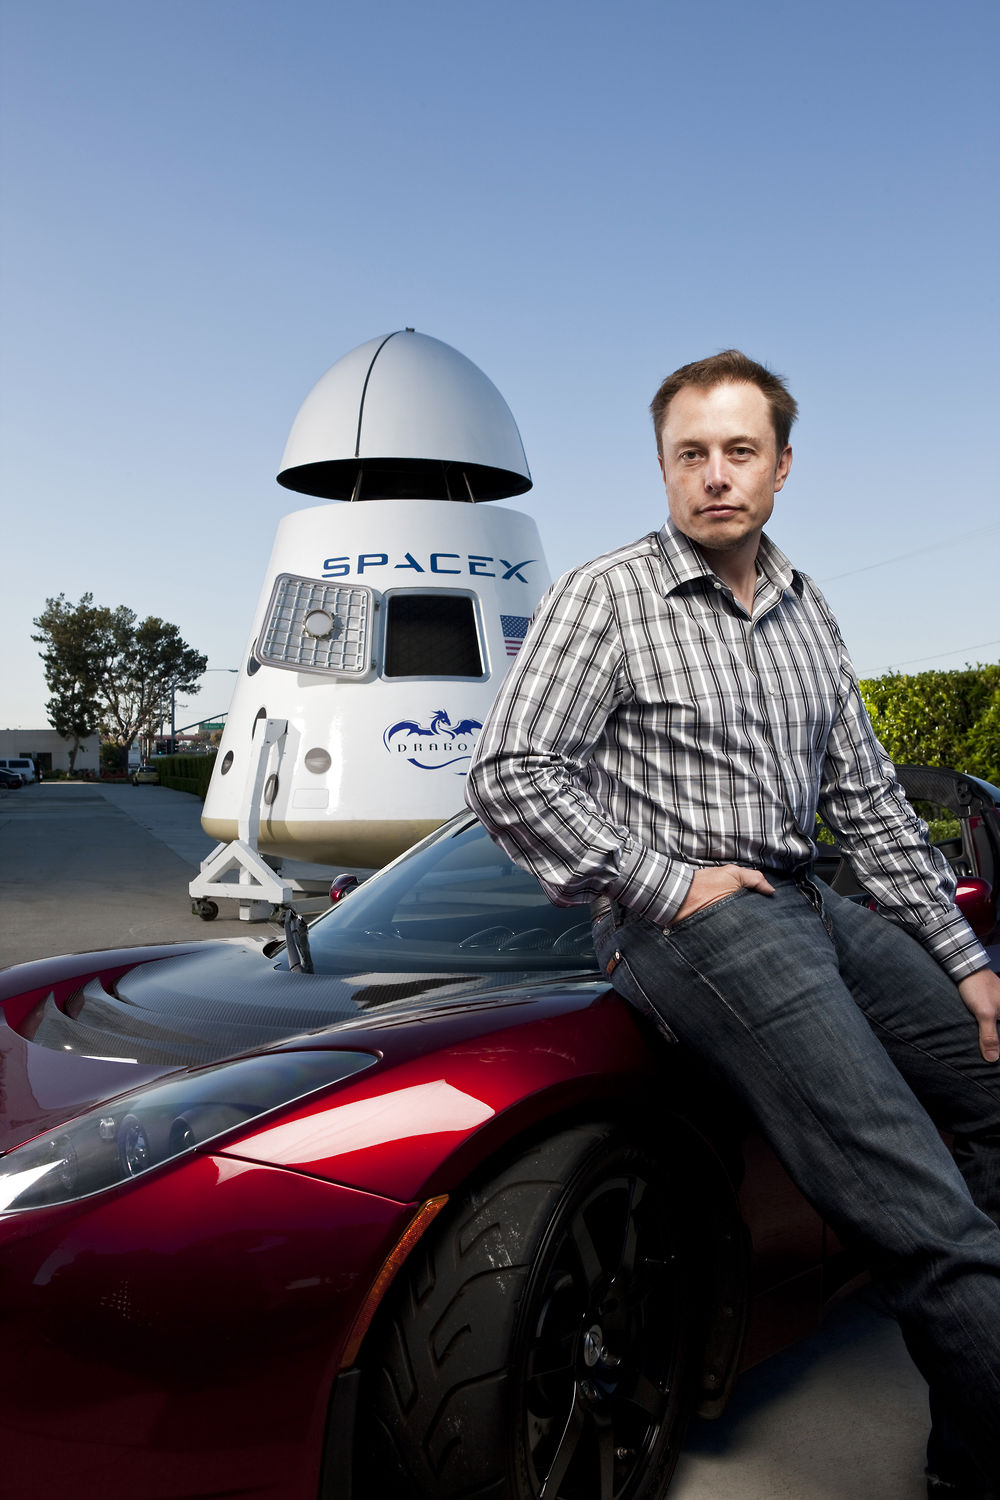 Elon Musk is an entrepreneur and engineer who cofounded PayPal, SpaceX and Tesla Motors. He is at the forefront of private space travel, electric car and solar power development. Photographed at SpaceX headquarters outside Los Angeles.